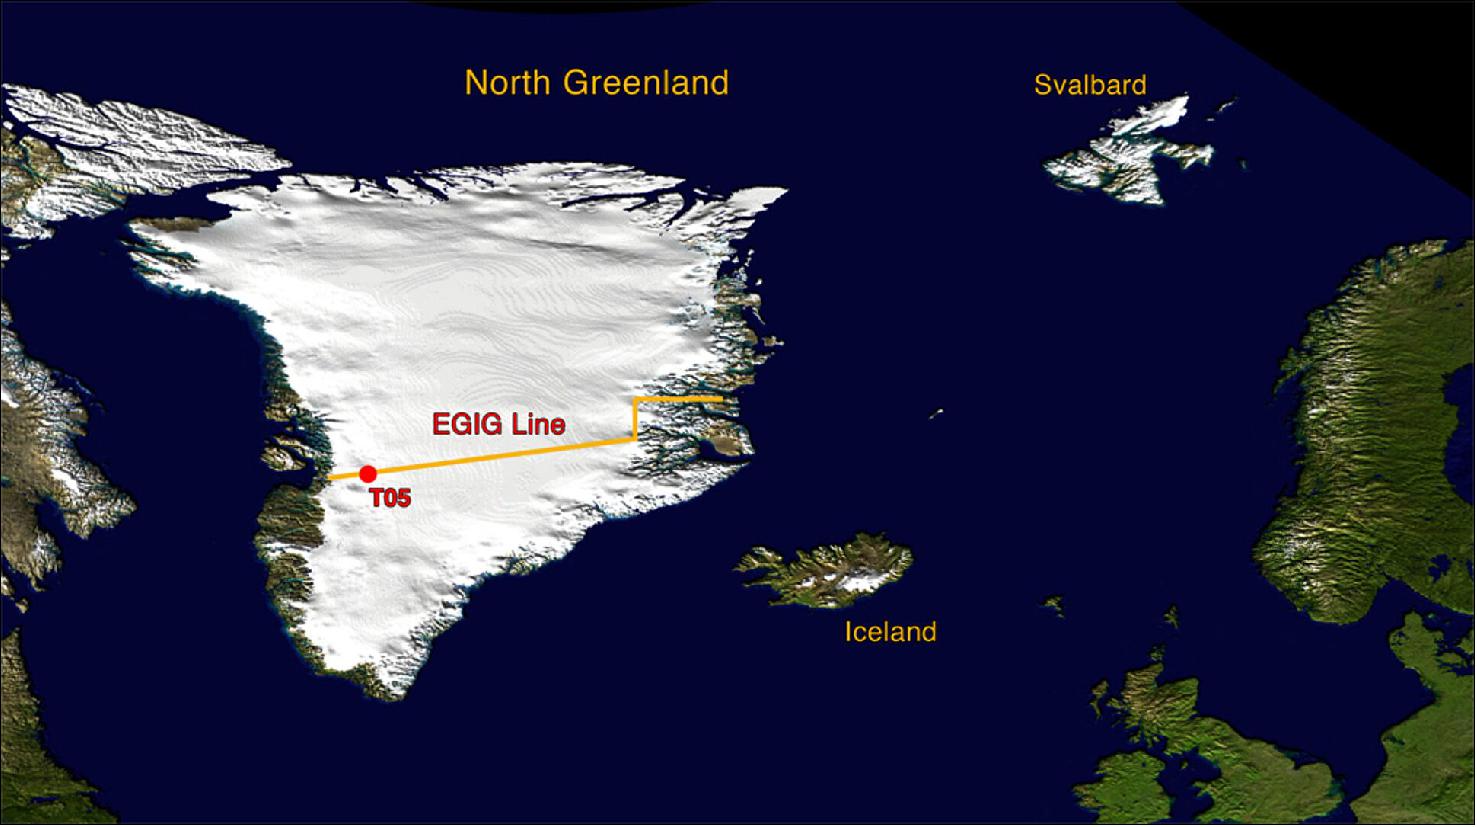 Figure 9: Greenland showing the EGIG (Expédition Glaciologique Internationale Groenland) line and site T05. This is the location where the Climate Change College students will participate in CryoVEx validation activities at the beginning of May 2006. The EGIG line crosses the central Greenland ice sheet and since it was first traversed in 1959 has been the site of various scientific surveys (image credit: ESA)